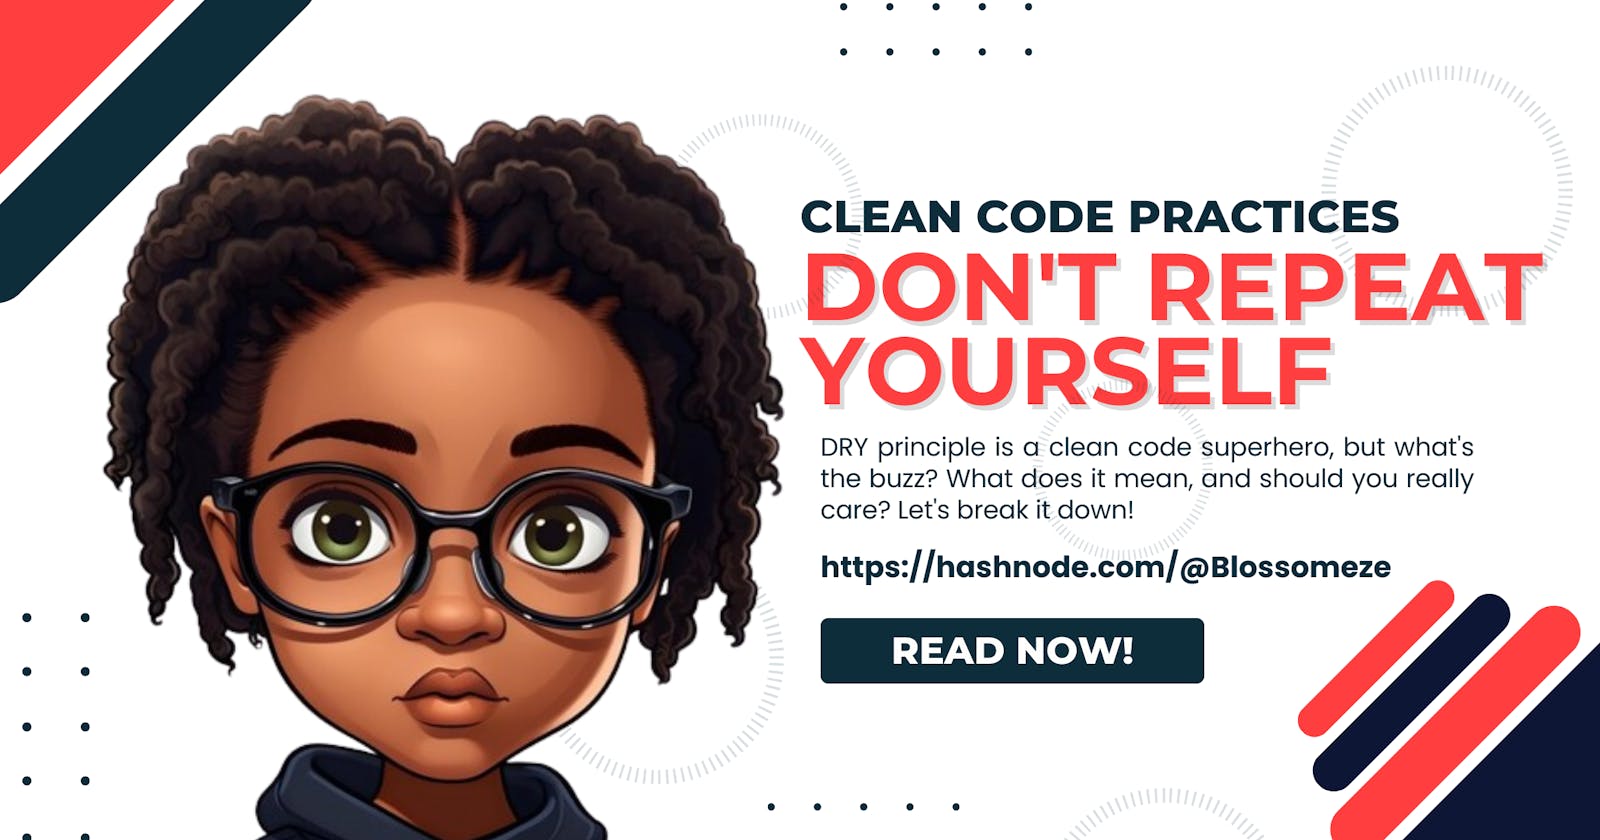 Clean Code Practices: Let's Keep it DRY!